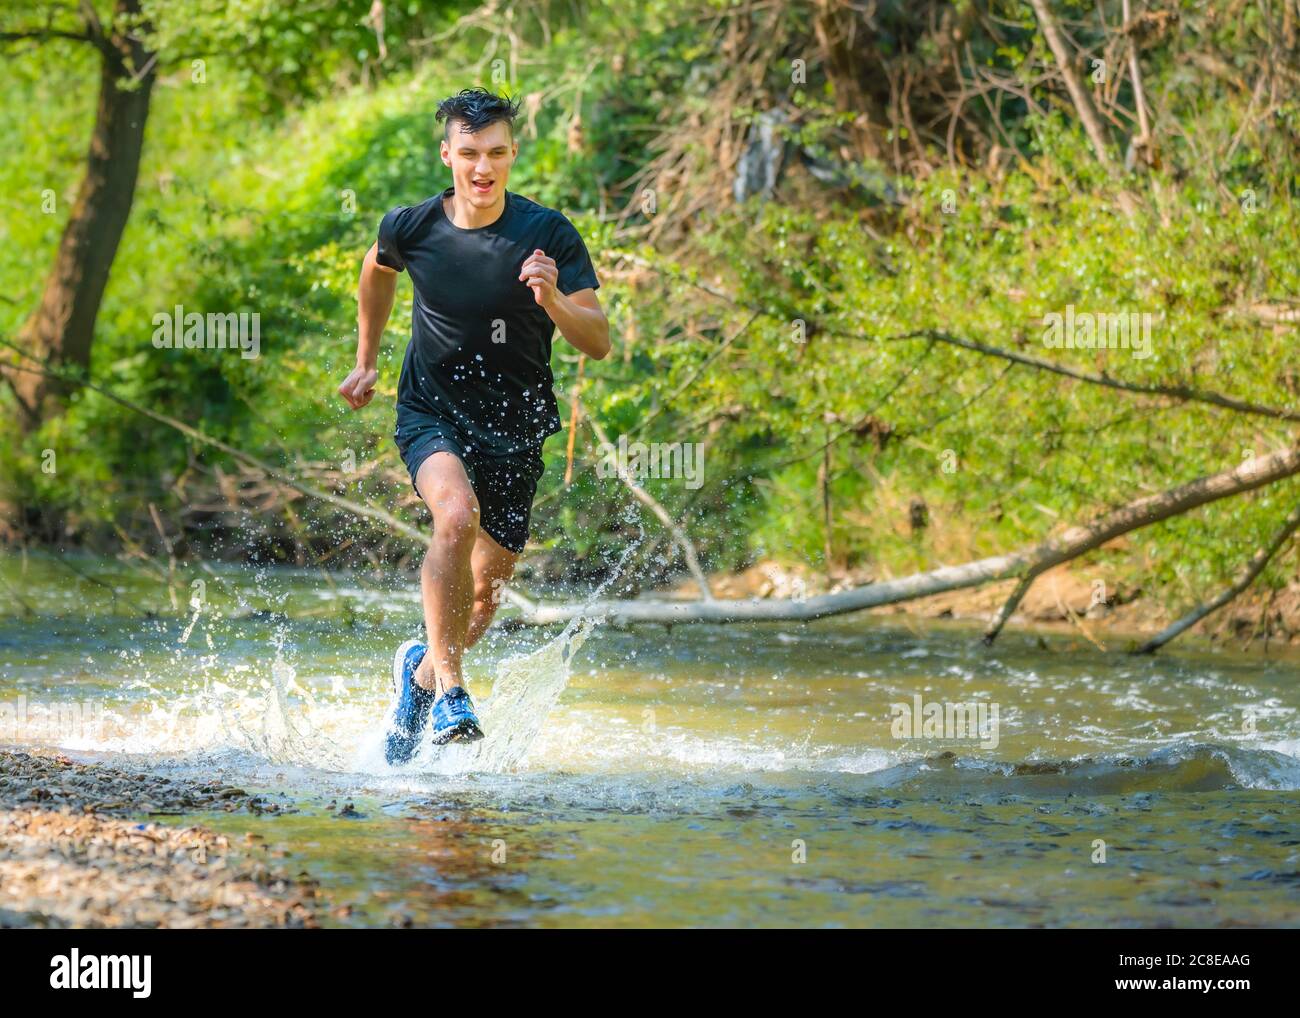 Young male athlete running while splashing water in stream Stock Photo